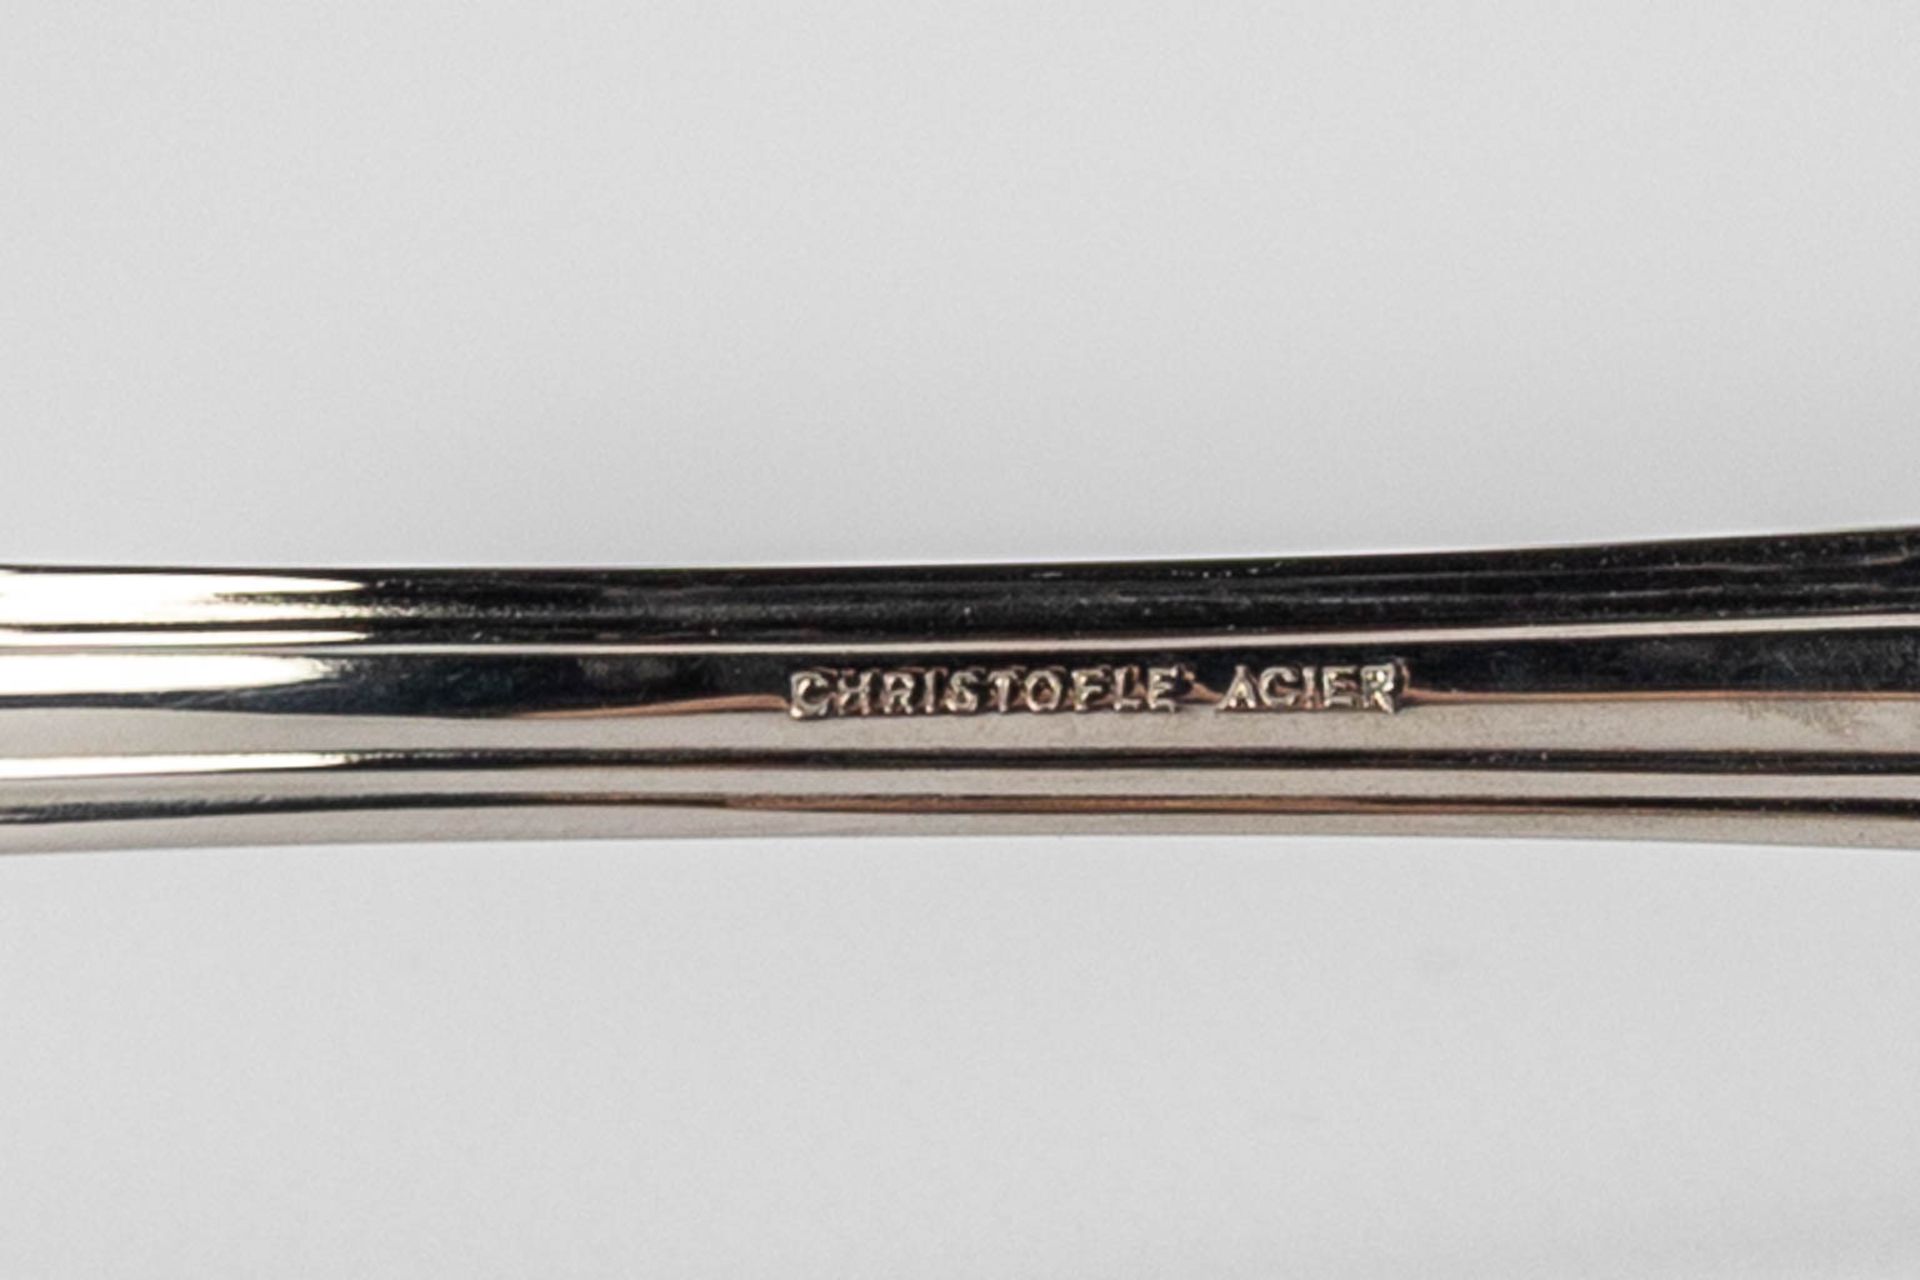 Christofle, model 'Albi' in an 'ambassador 125' case, a 124-piece flatware set, stainless steel. (L - Image 3 of 12